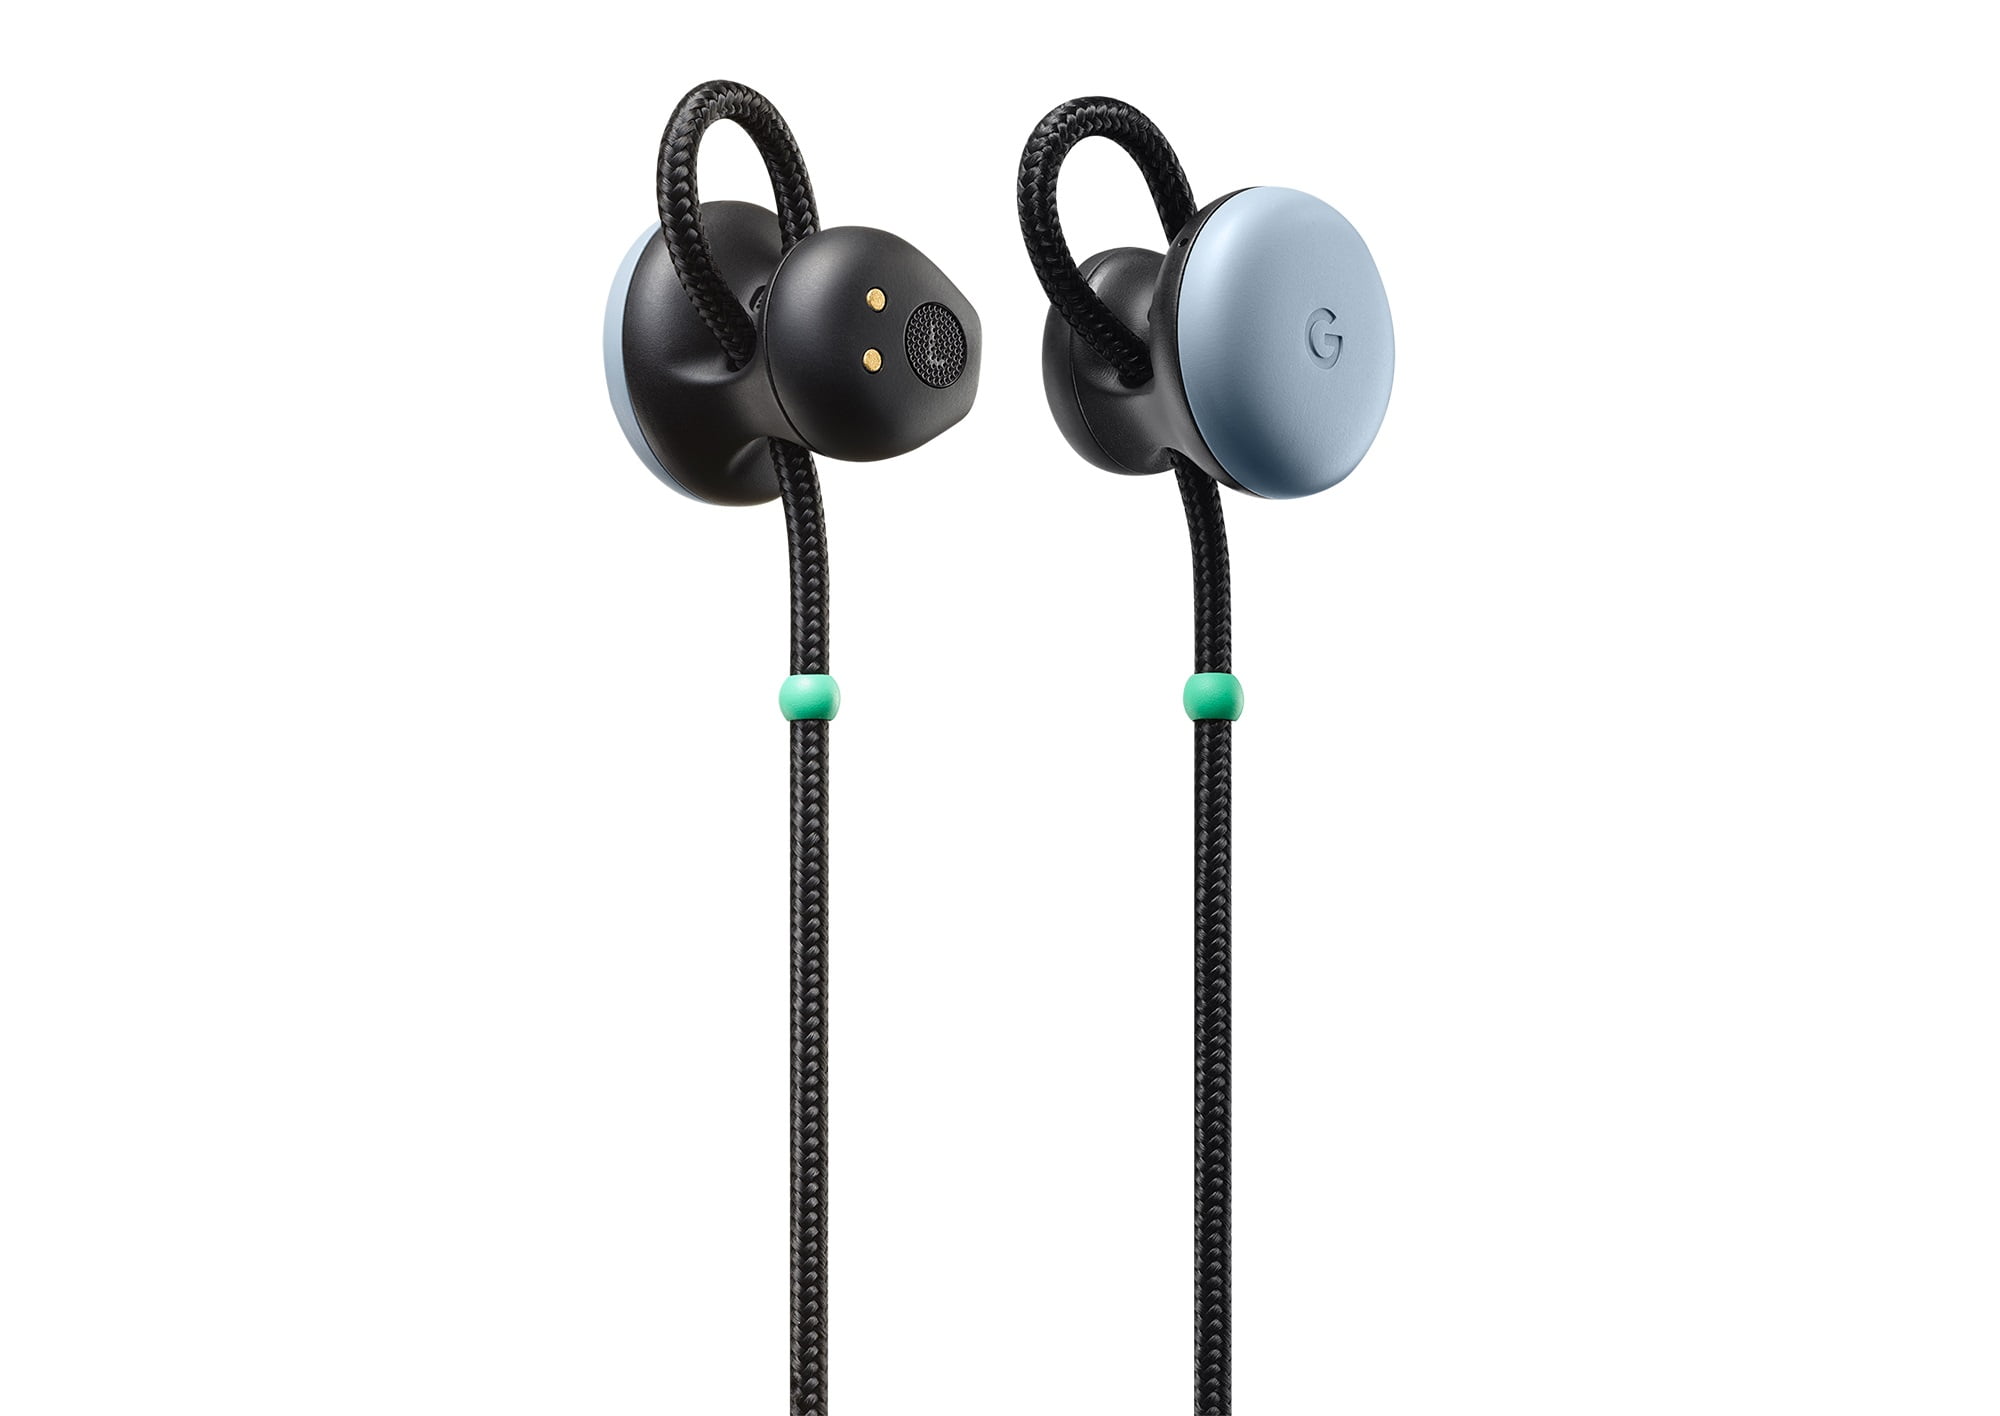 Pixel Buds review: Wireless headphones for a niche audience - CNET